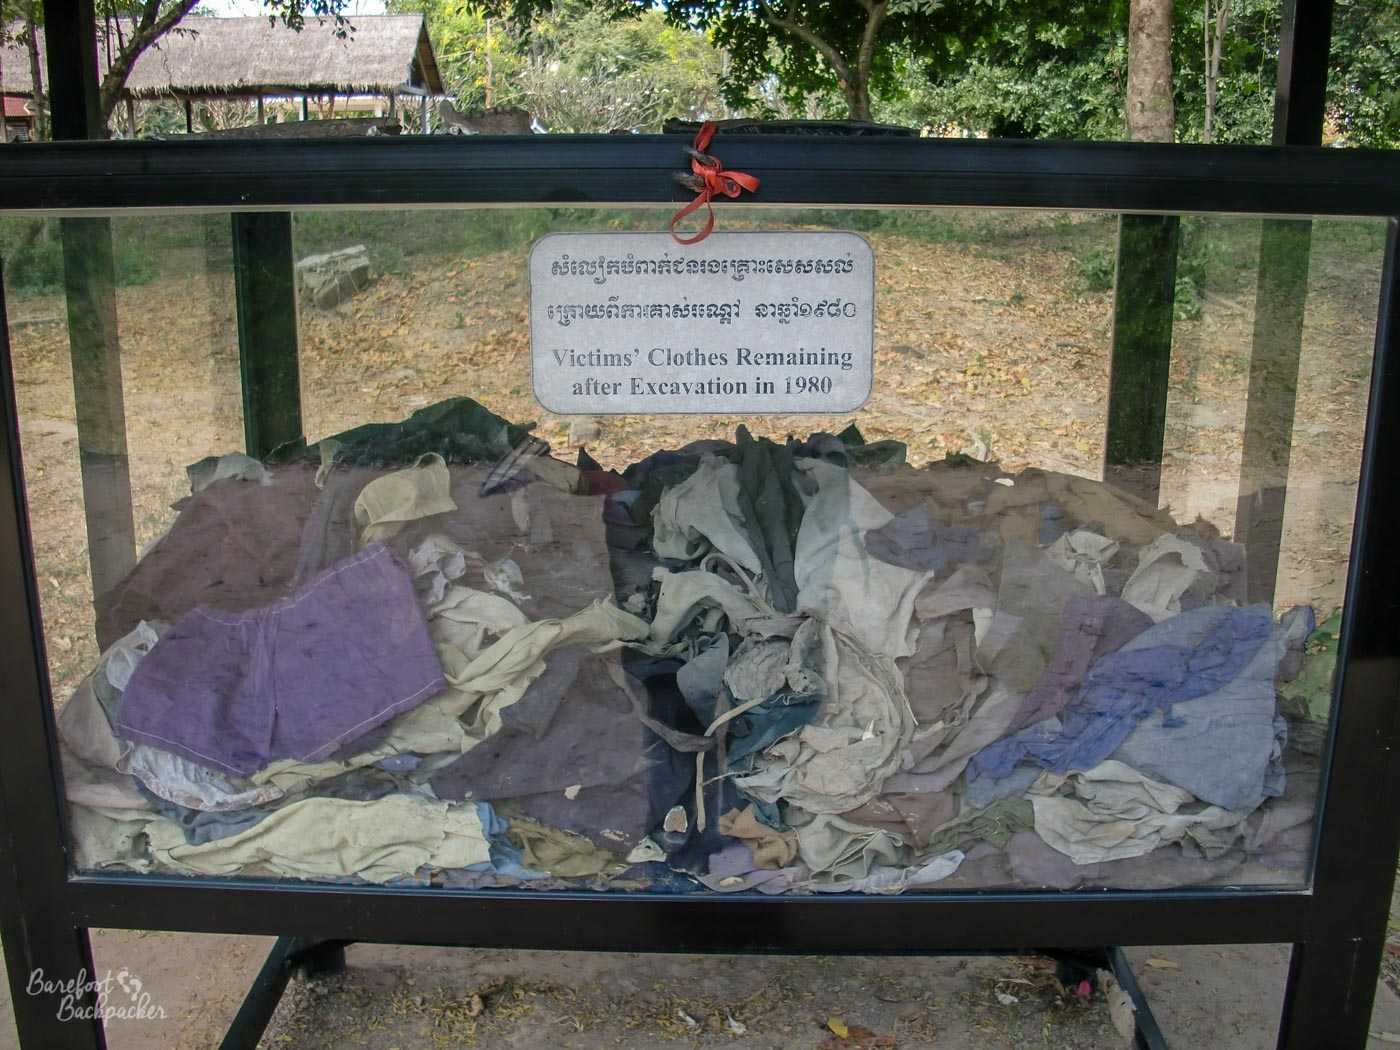 A clear box on legs, filled with fragments of fabric. A sign on the box says 'Victims' clothes remaining after excavation in 1980'.